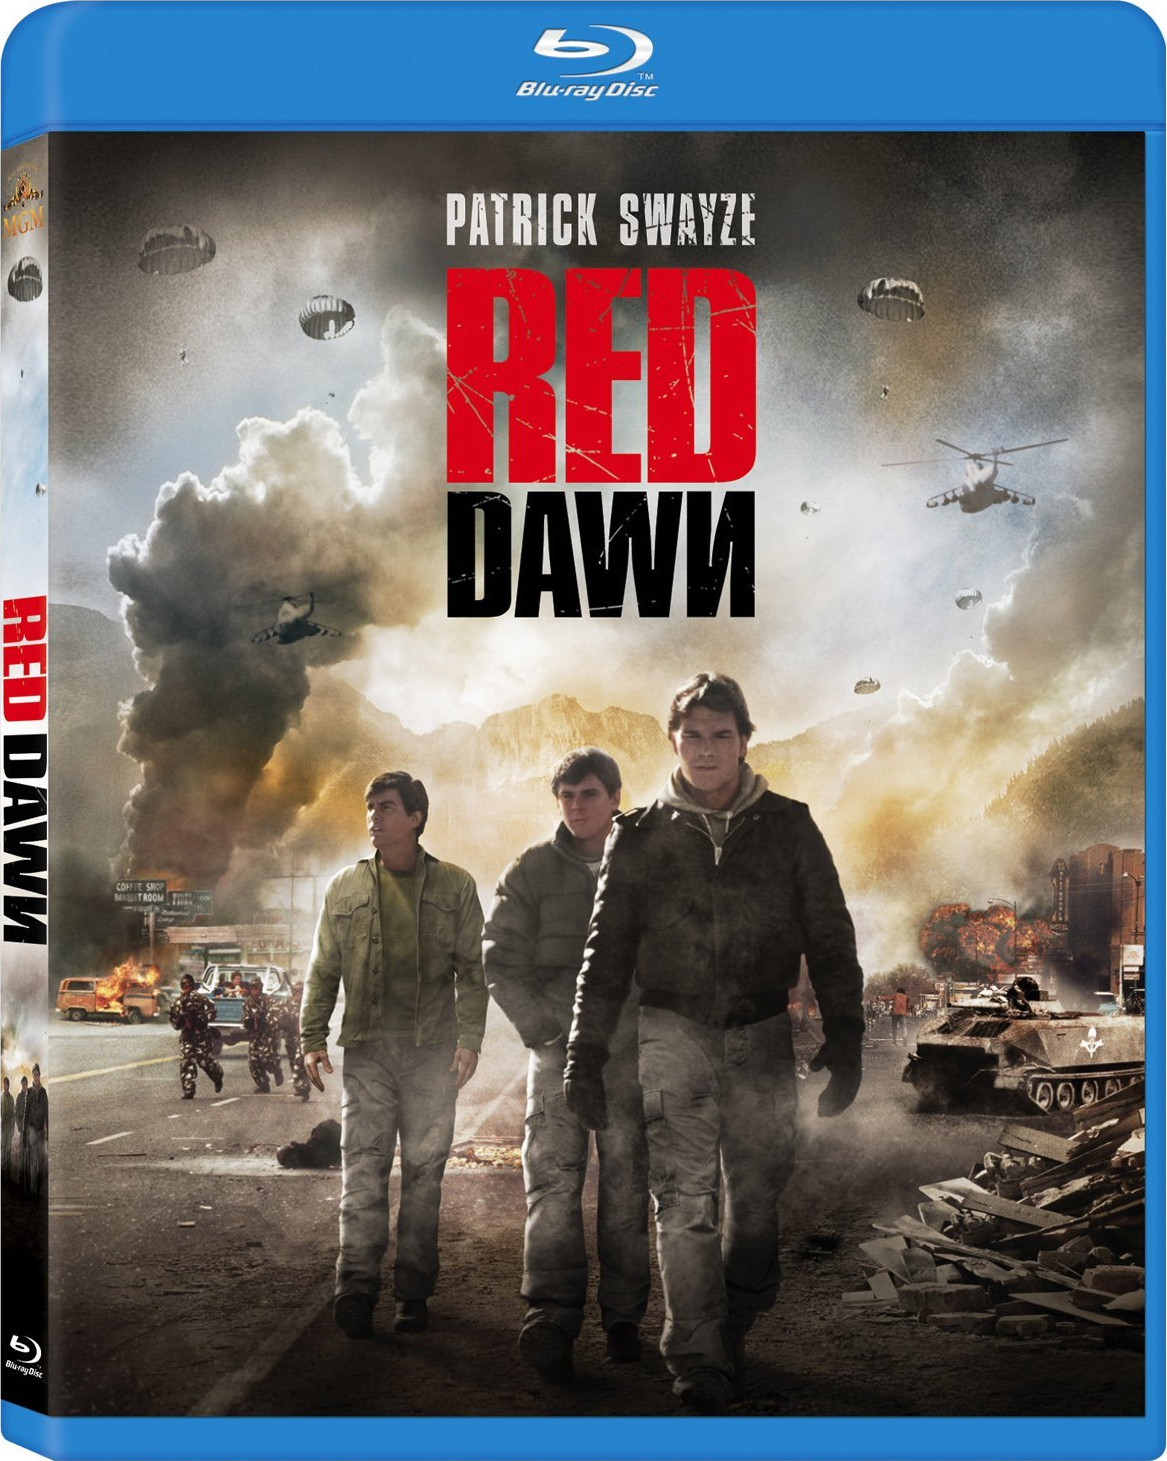 Amazing Red Dawn (1984) Pictures & Backgrounds